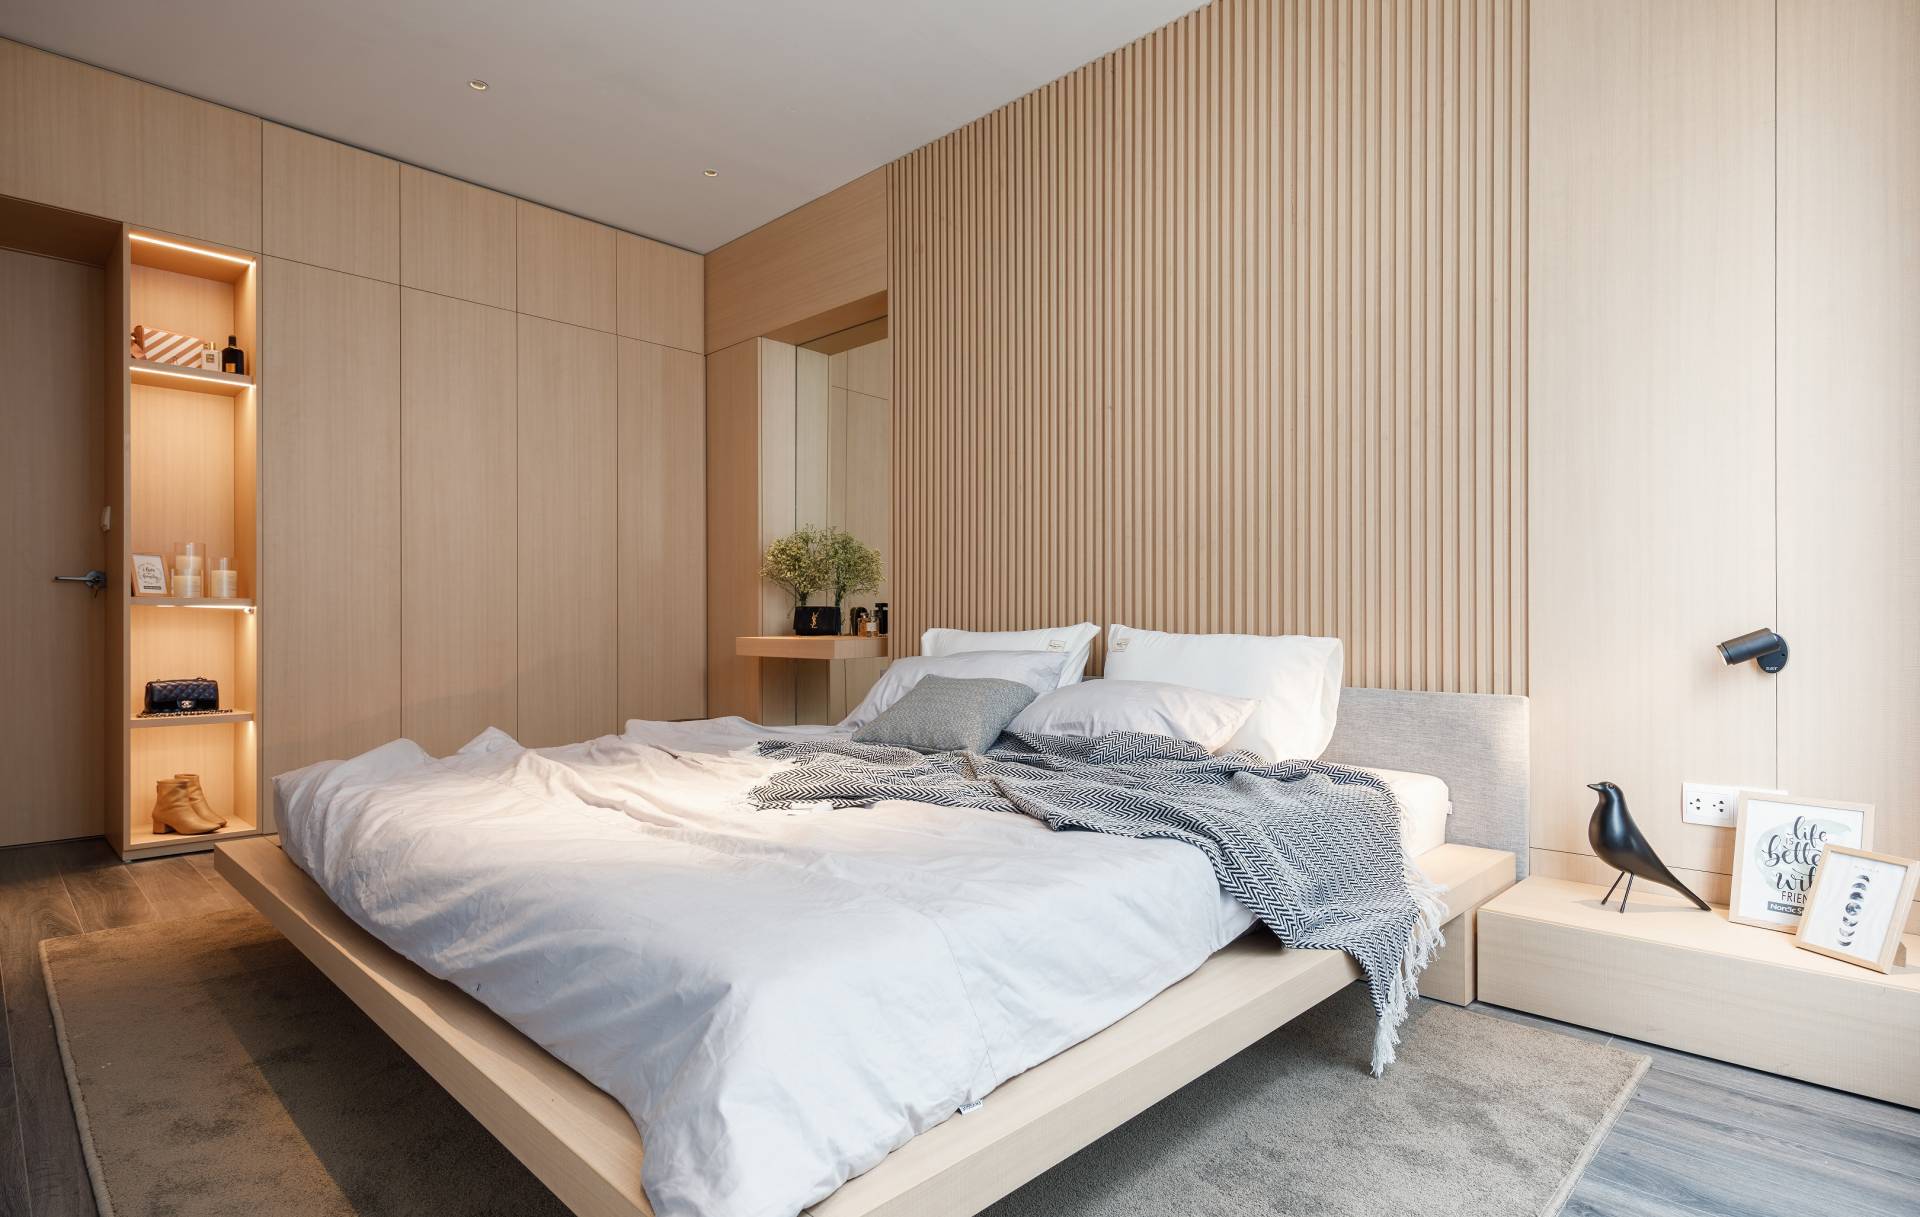 The master bedroom is neat and scientific with warm tones but no less luxurious.